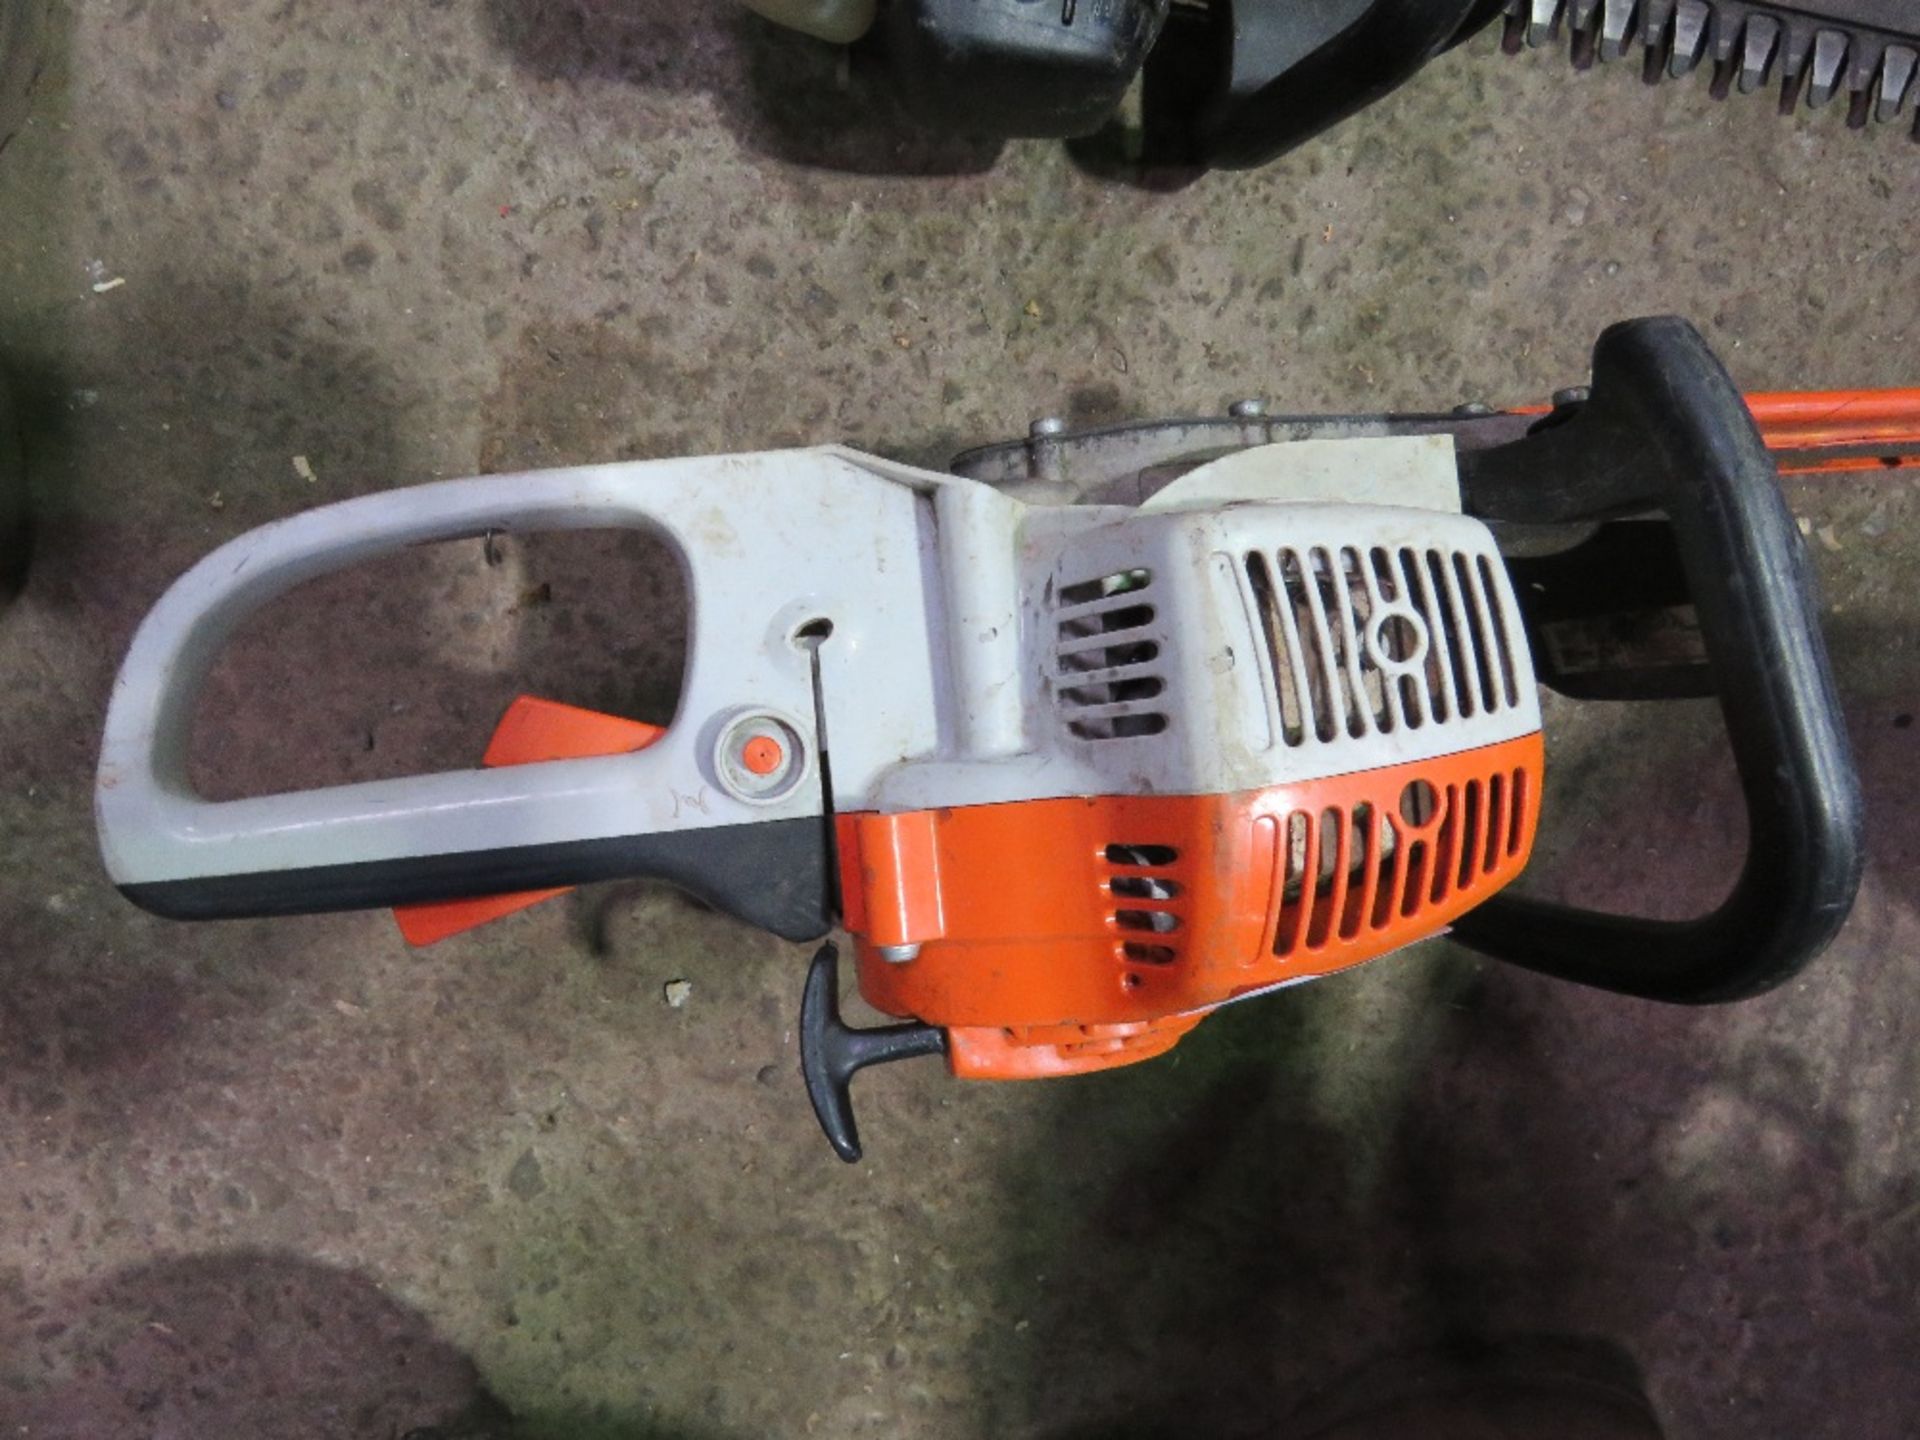 STIHL HS45 PETROL ENGINED PROFESSIONAL HEDGE CUTTER. DIRECT FROM LOCAL LANDSCAPE COMPANY WHO ARE CLO - Image 4 of 5